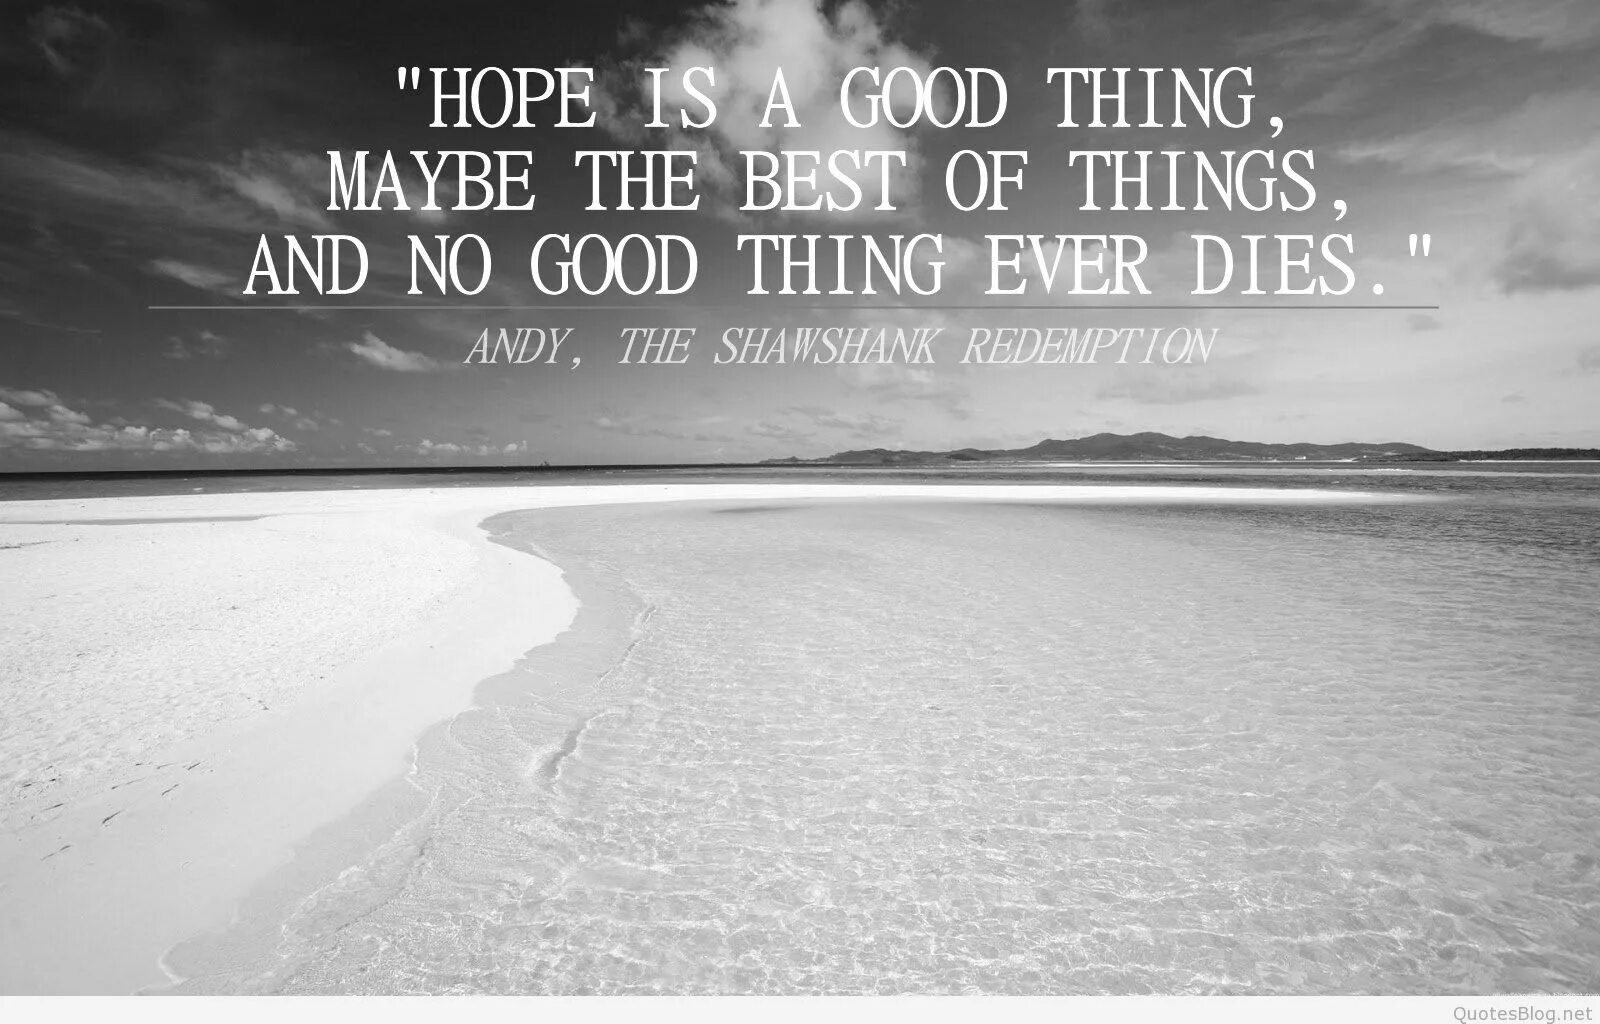 I hope he will. Hope is a good thing maybe the best of things and no good thing ever dies. Remember Red hope is a good thing. Shawshank Redemption. The Shawshank Redemption цитаты.